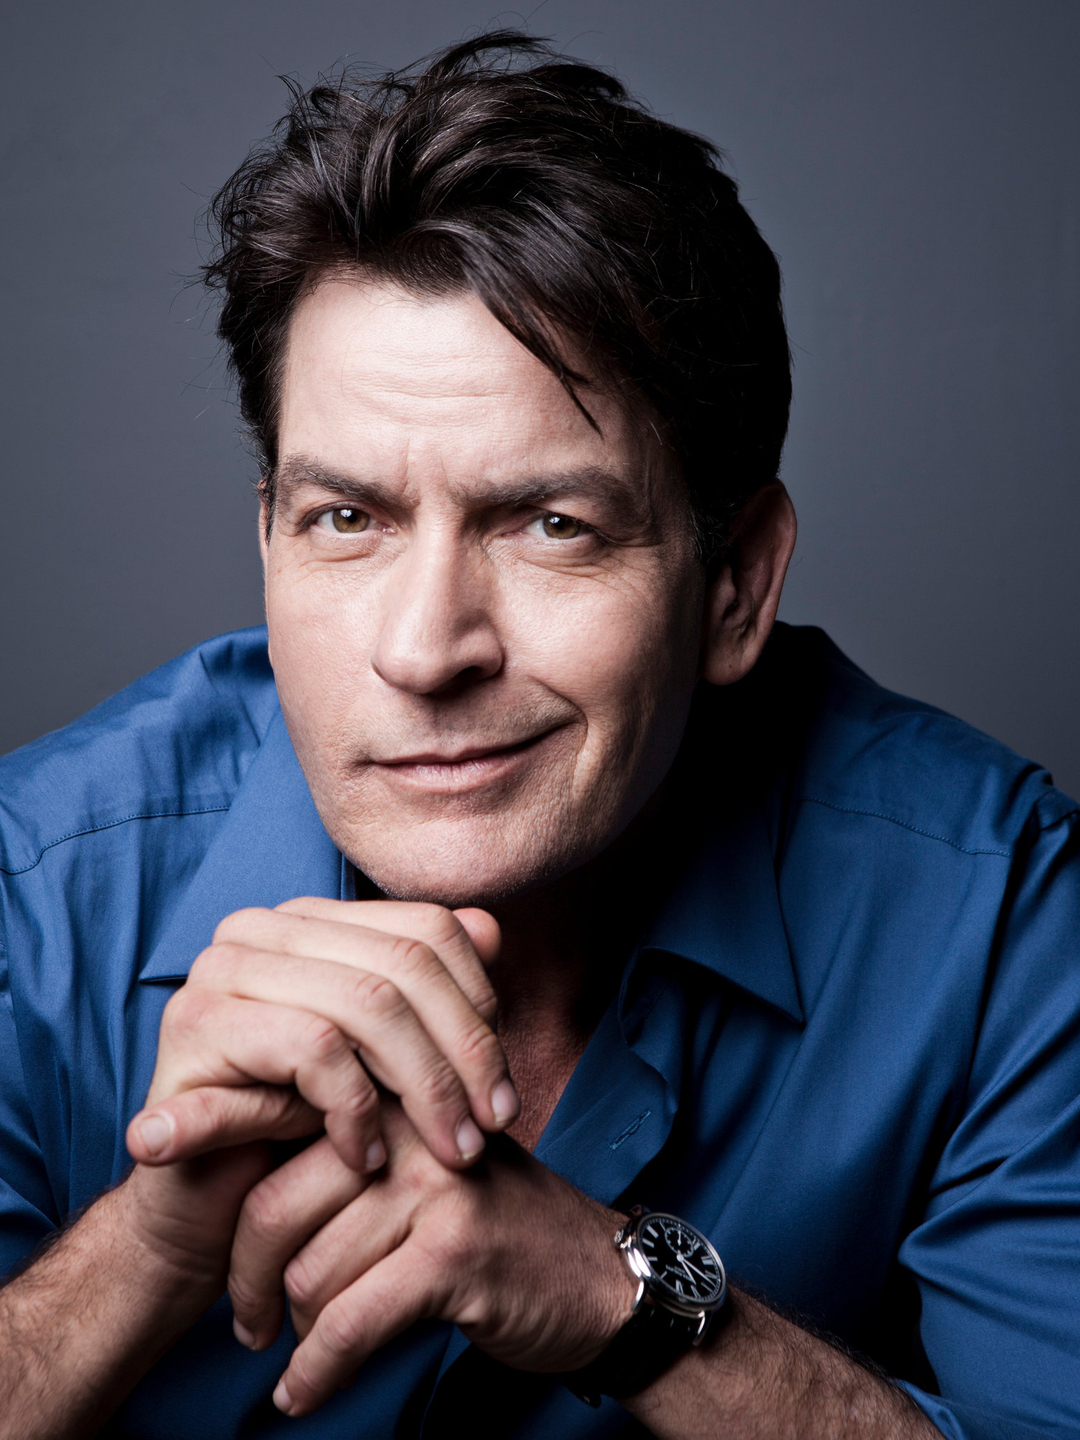 Charlie Sheen who is his father